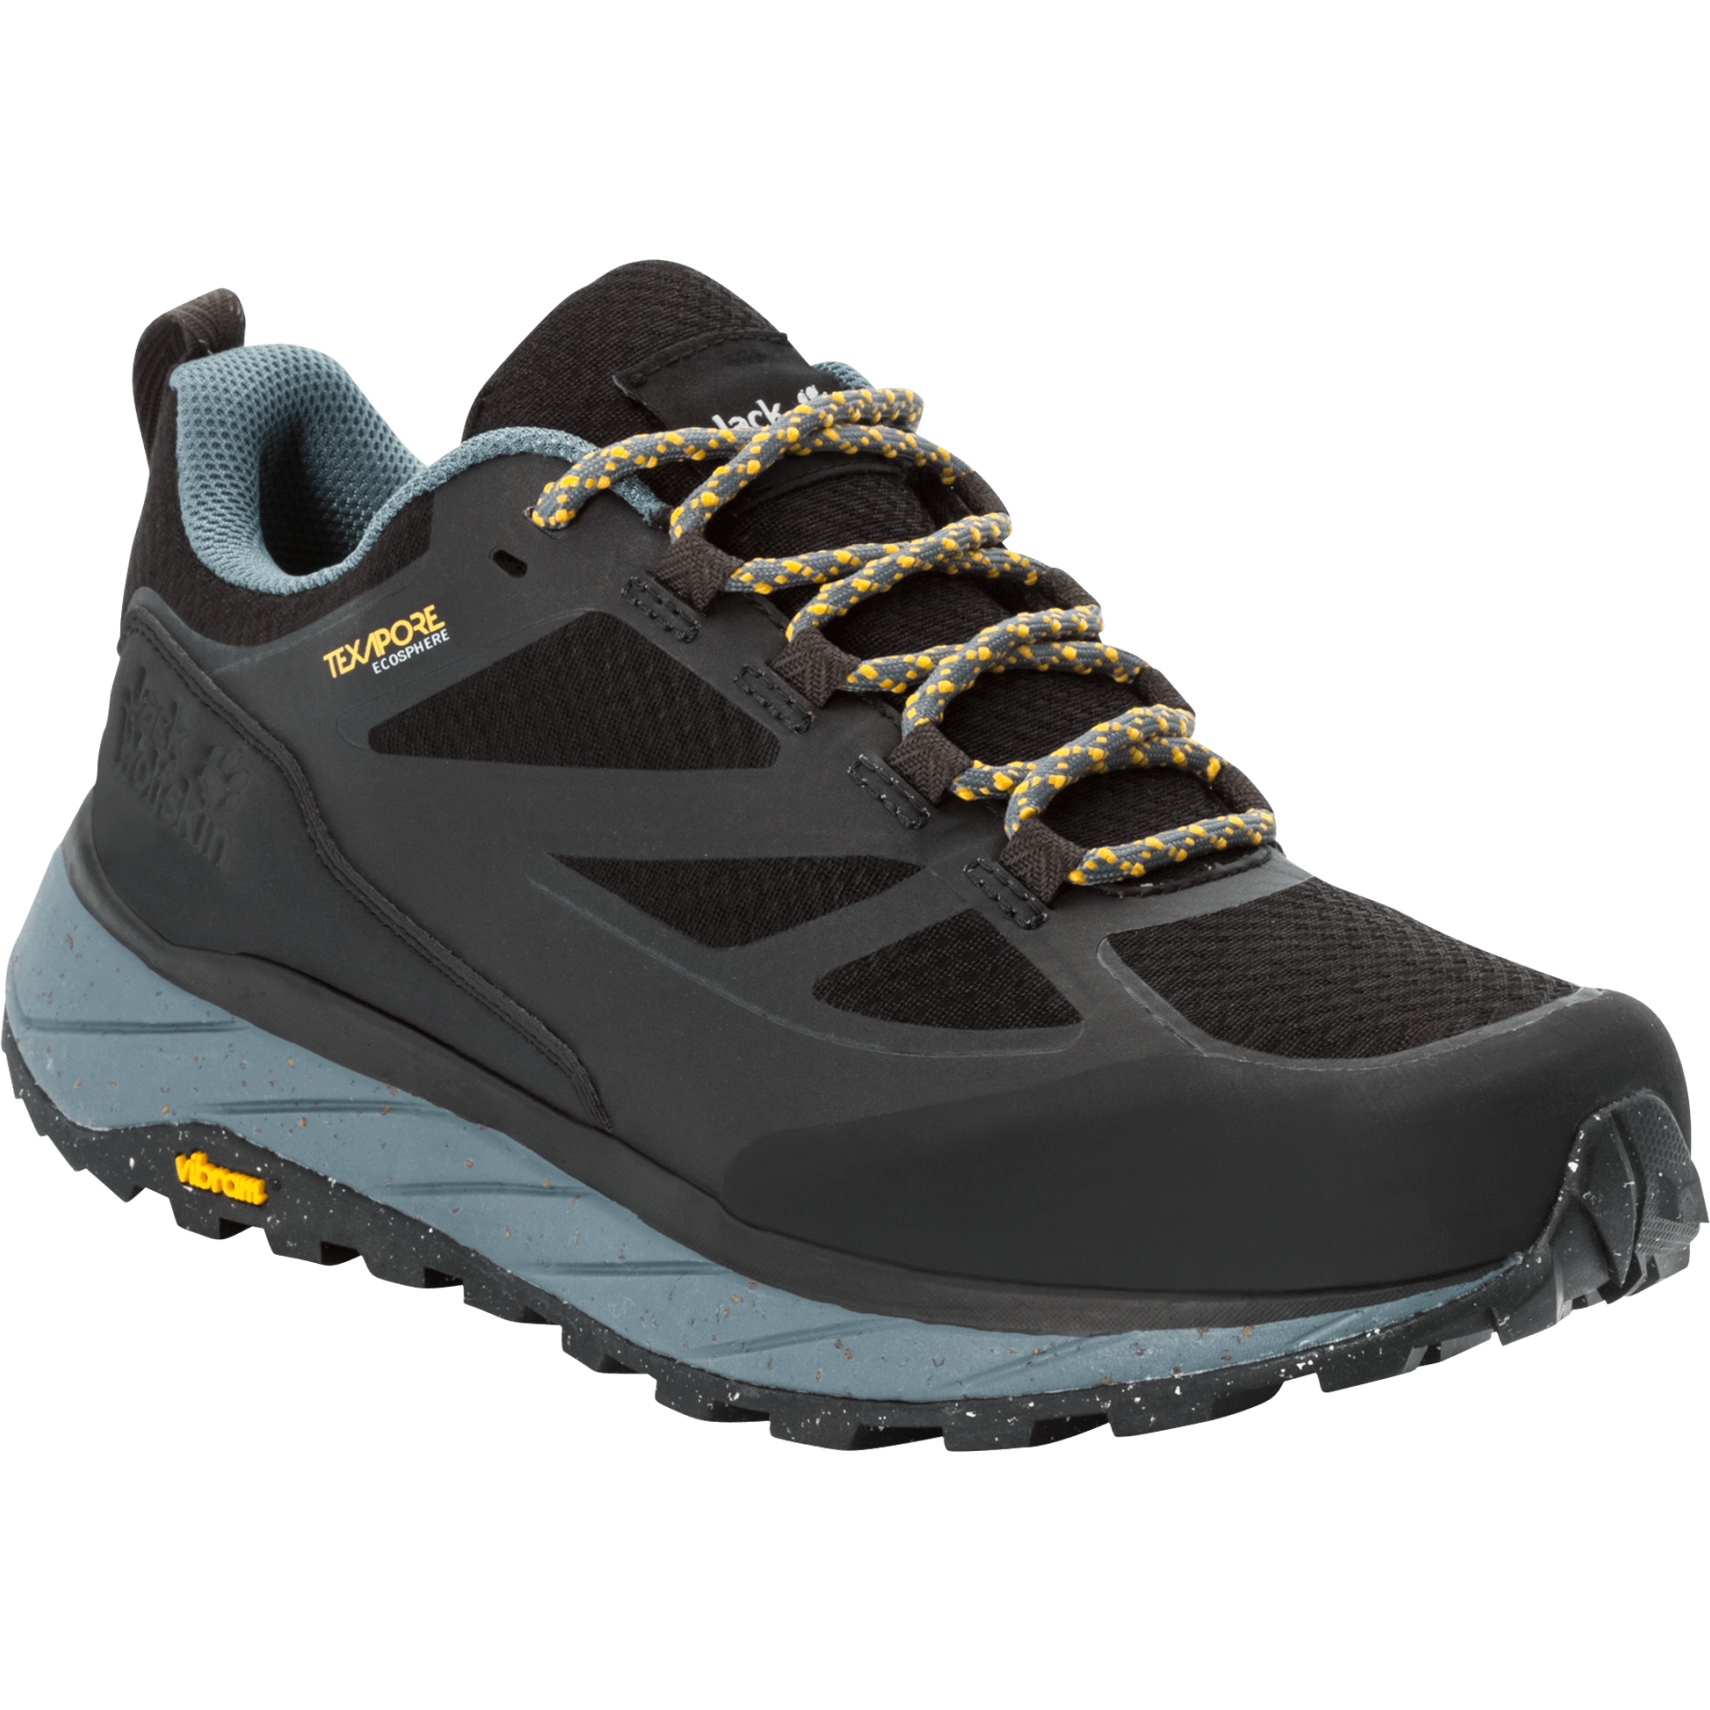 Picture of Jack Wolfskin Terraventure Texapore Low Hiking Shoes Men - phantom / grey